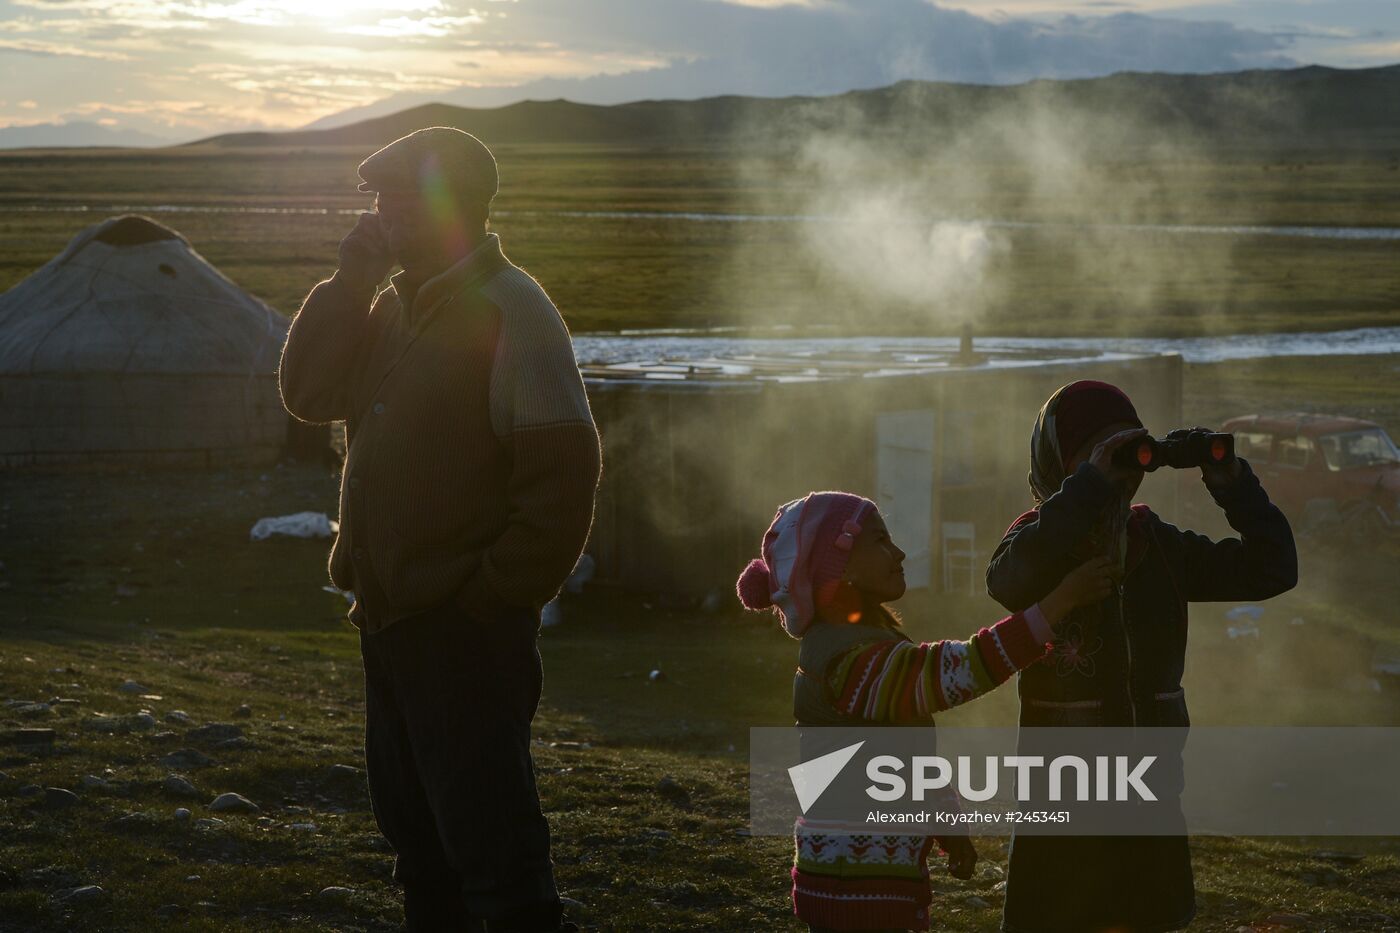 Life of shepherds in the Altai Republic